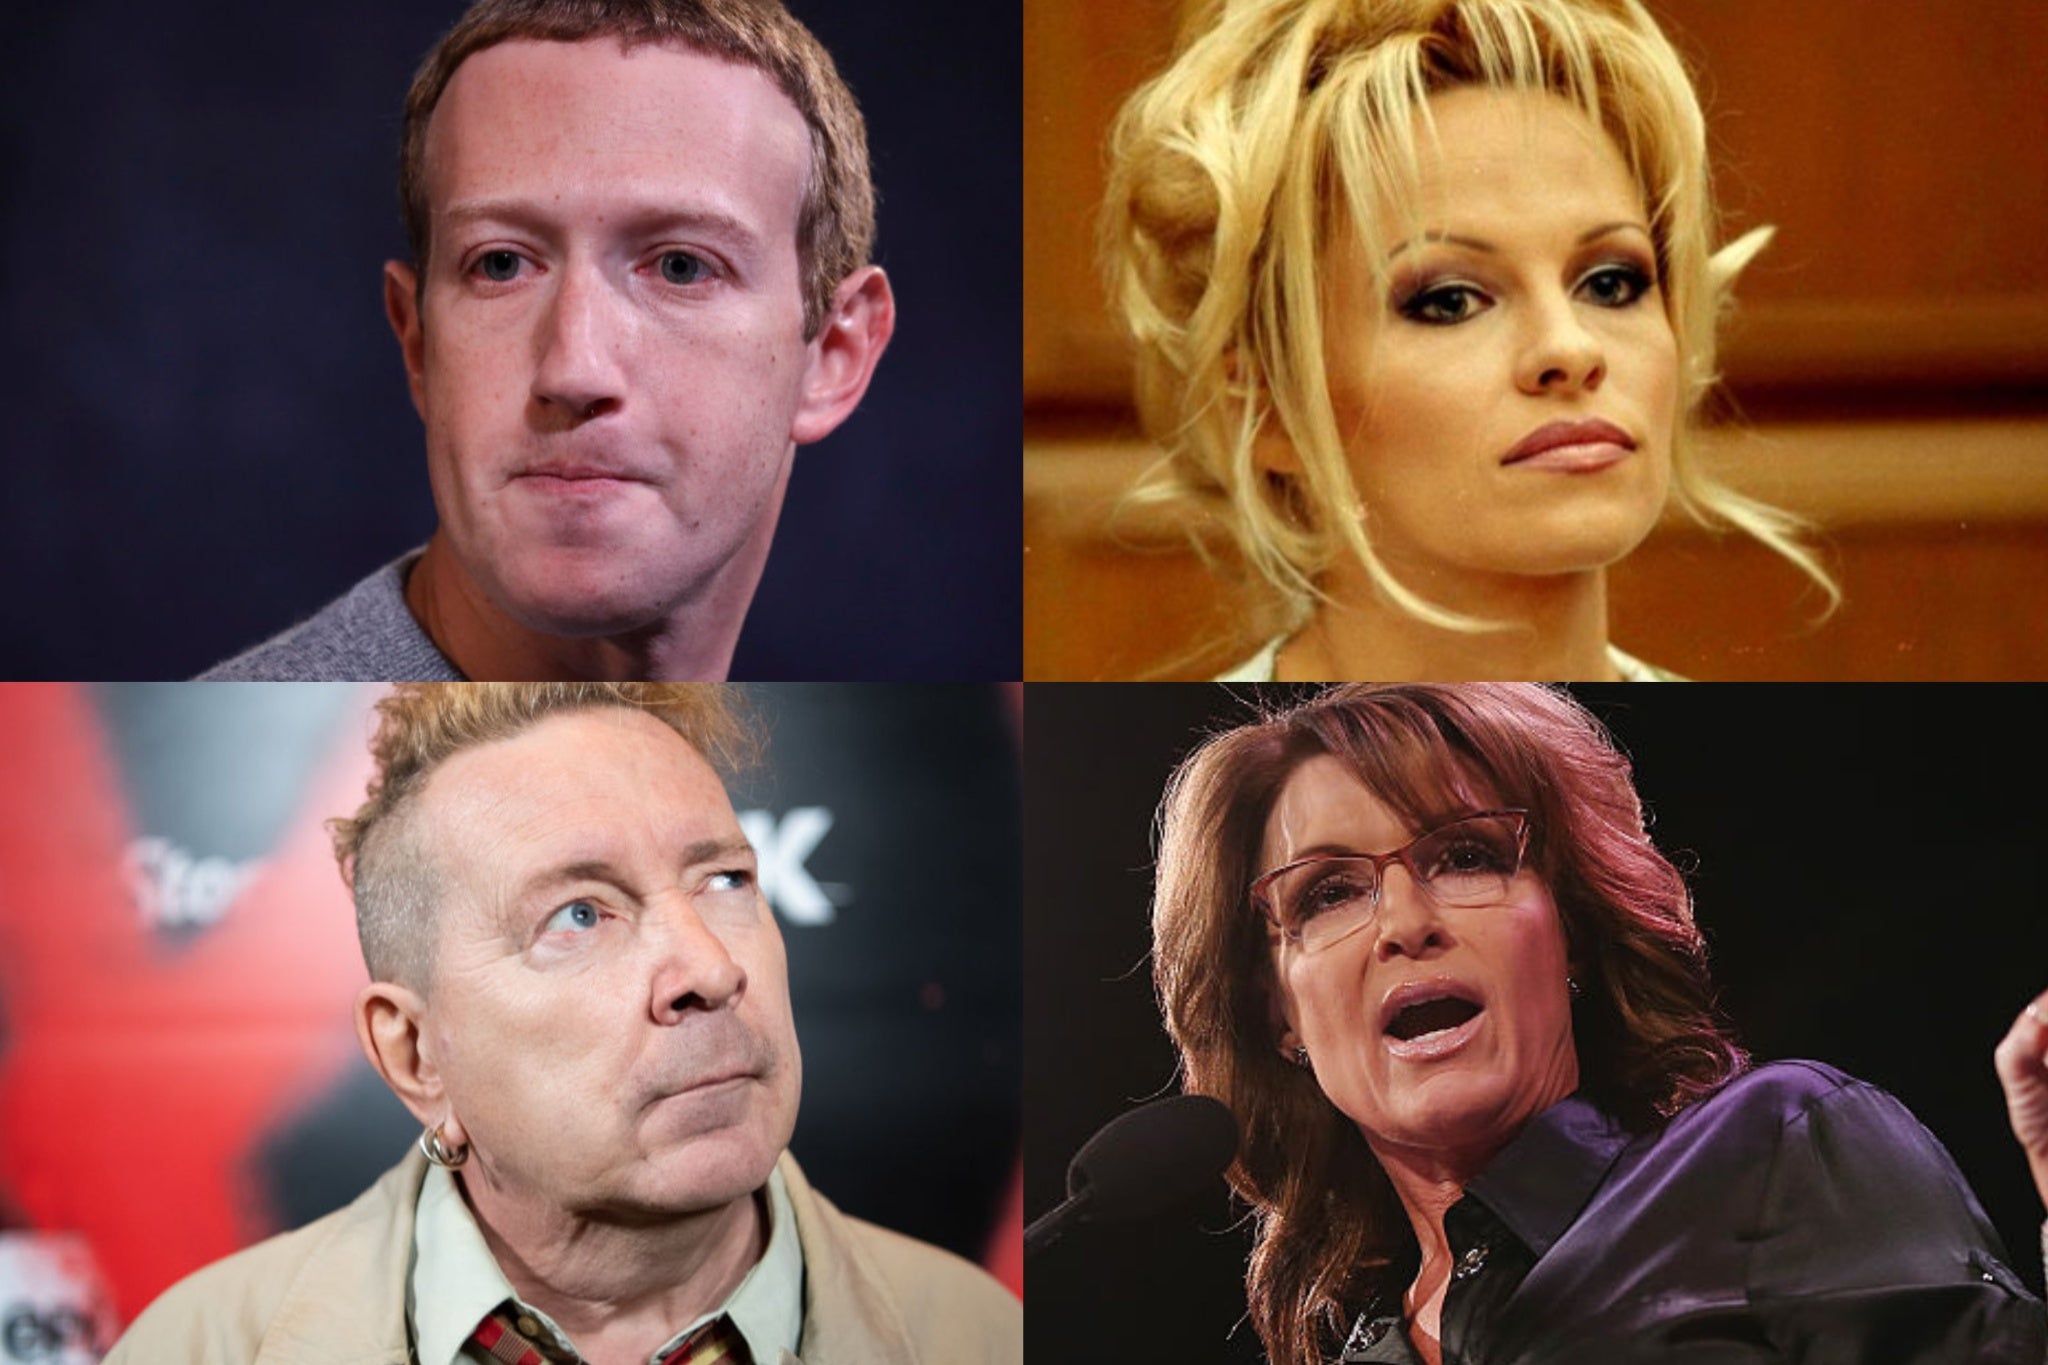 Pamela Anderson, Sarah Palin, John Lydon and Mark Zuckerberg are among the stars who’ve condemned their own biopics